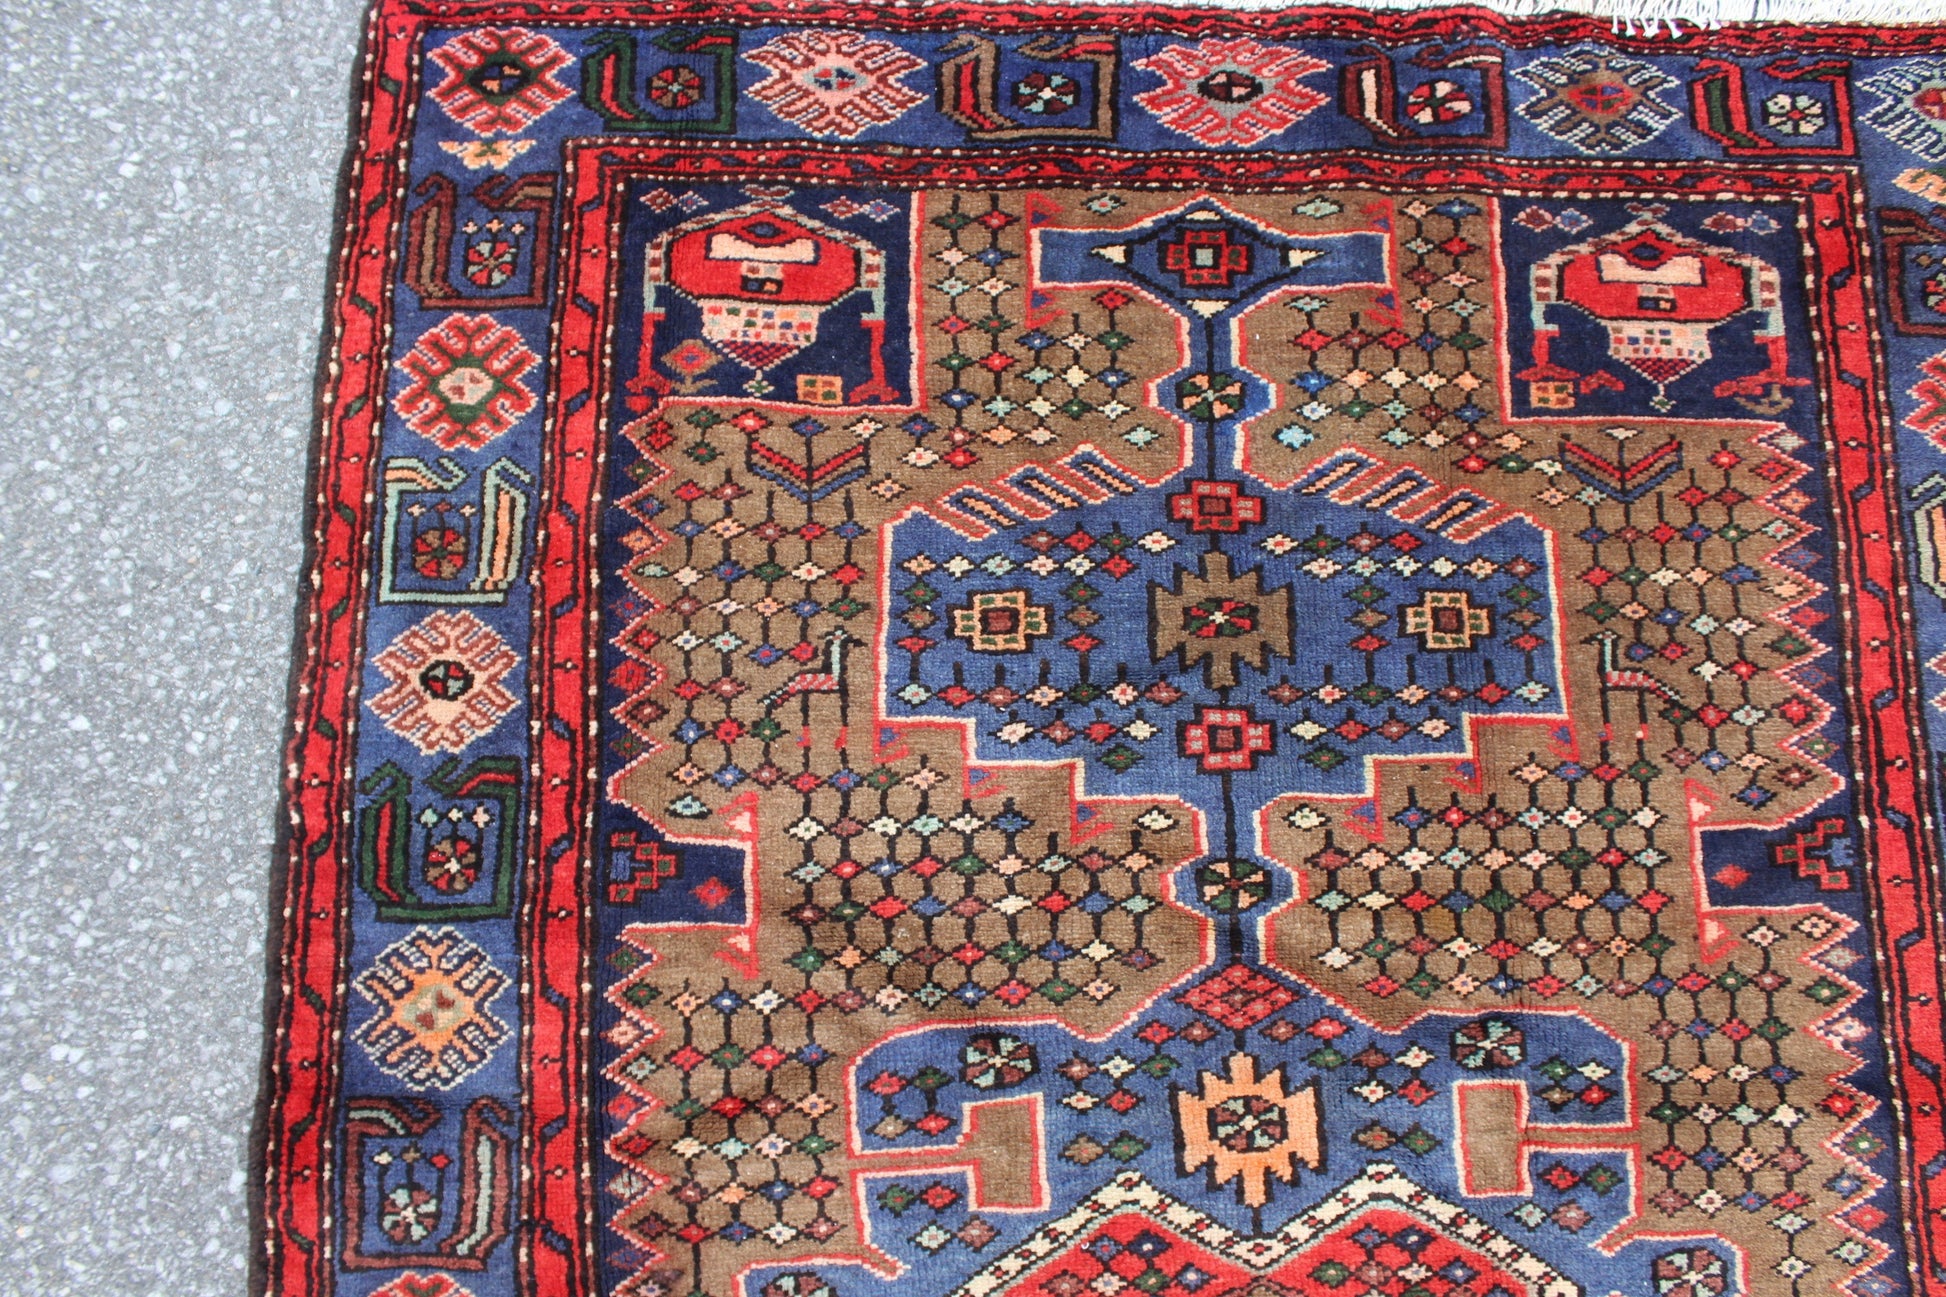 Beige Rug 4x7 with Blue Pink Red Accent | Tribal Handmade Wool